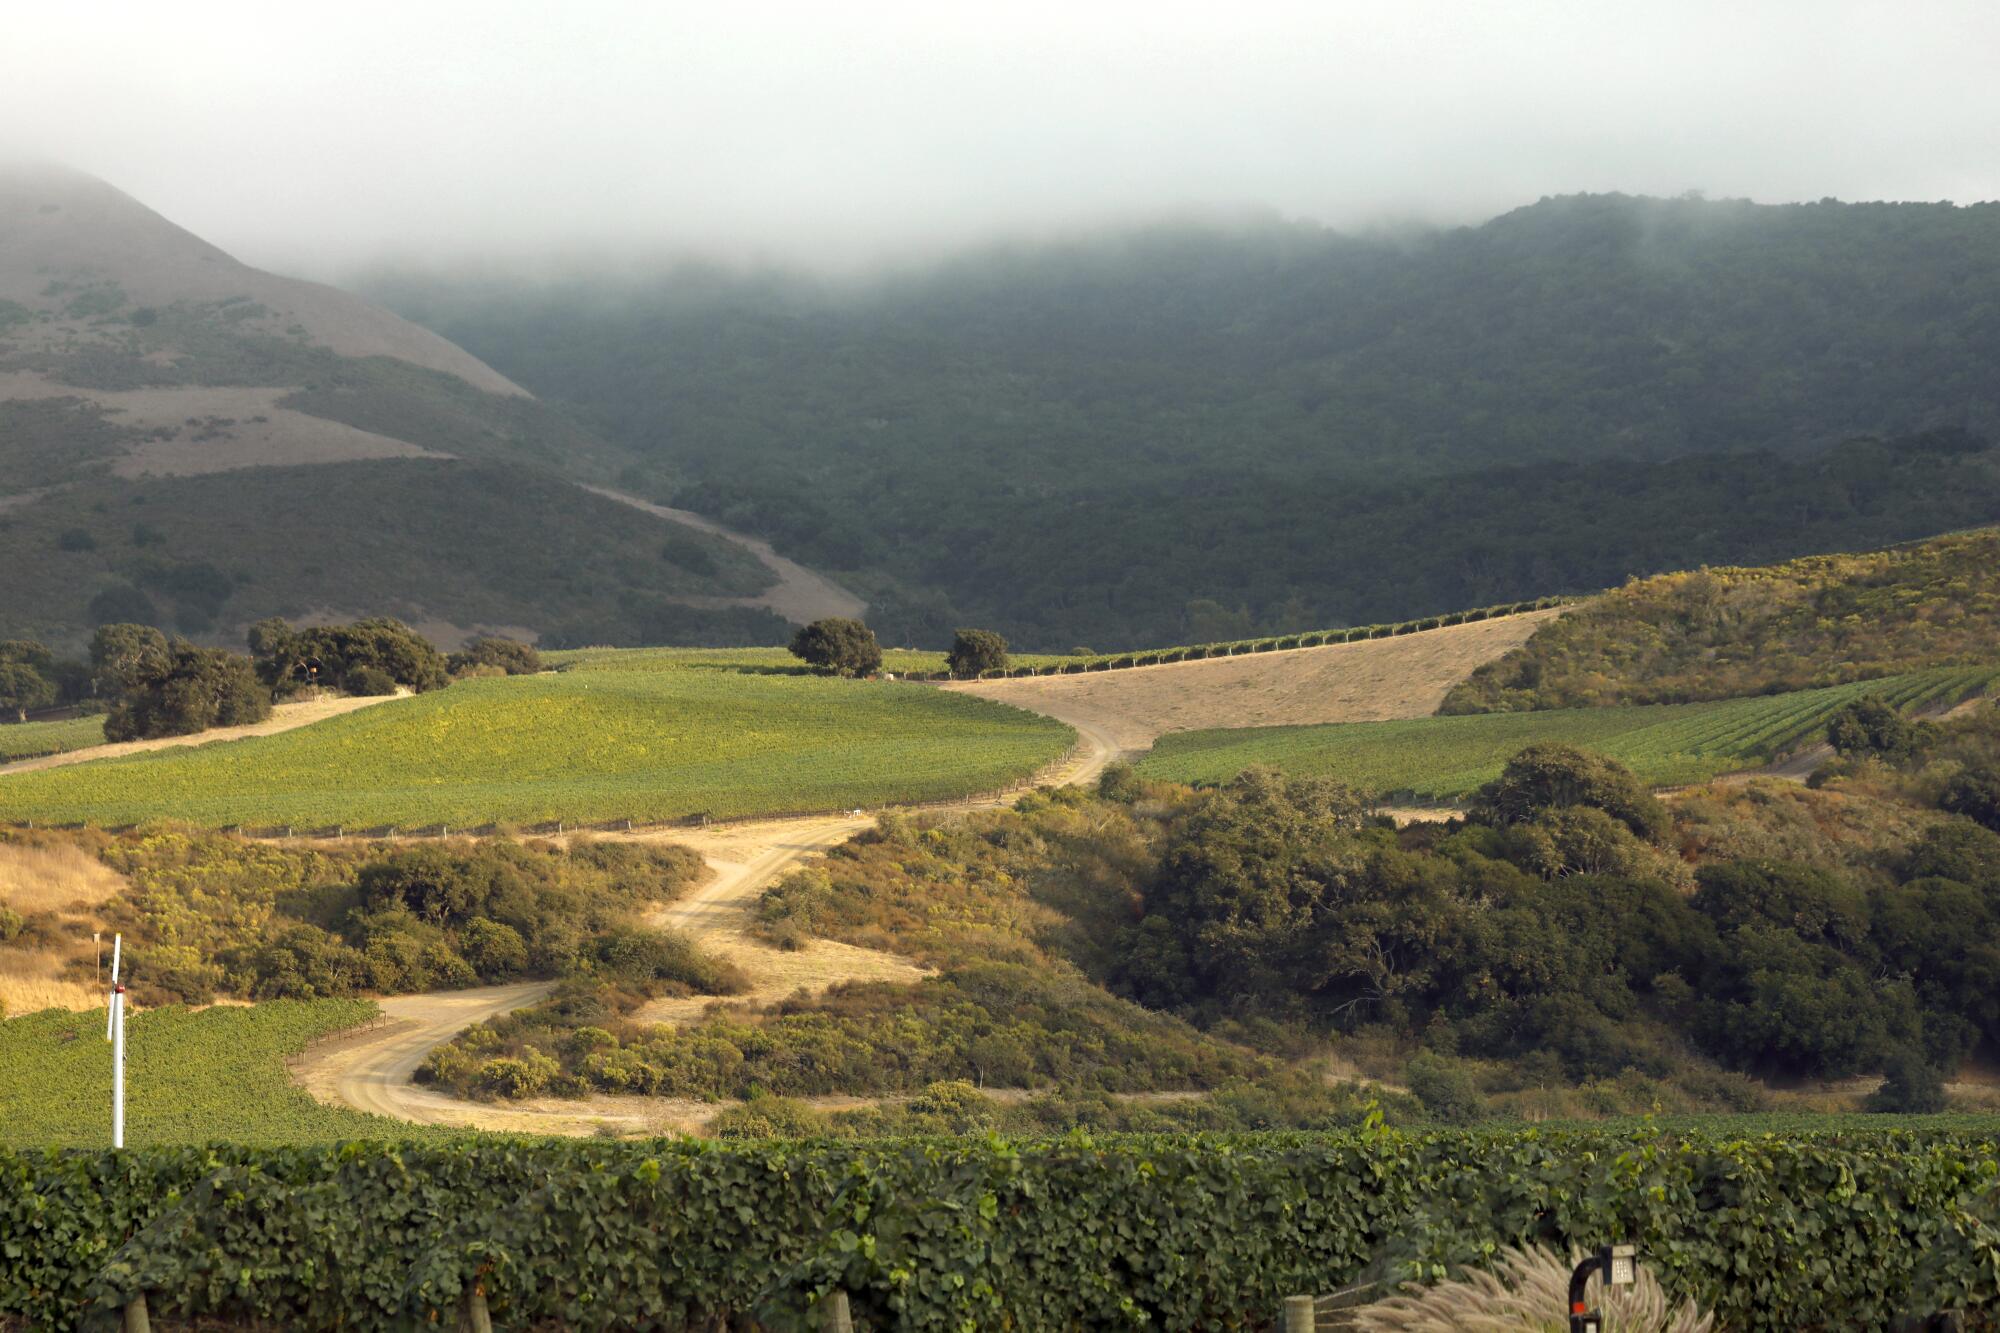 Fog starts to roll in over the hills from the west into the valleys surrounding vineyards in Lompoc.